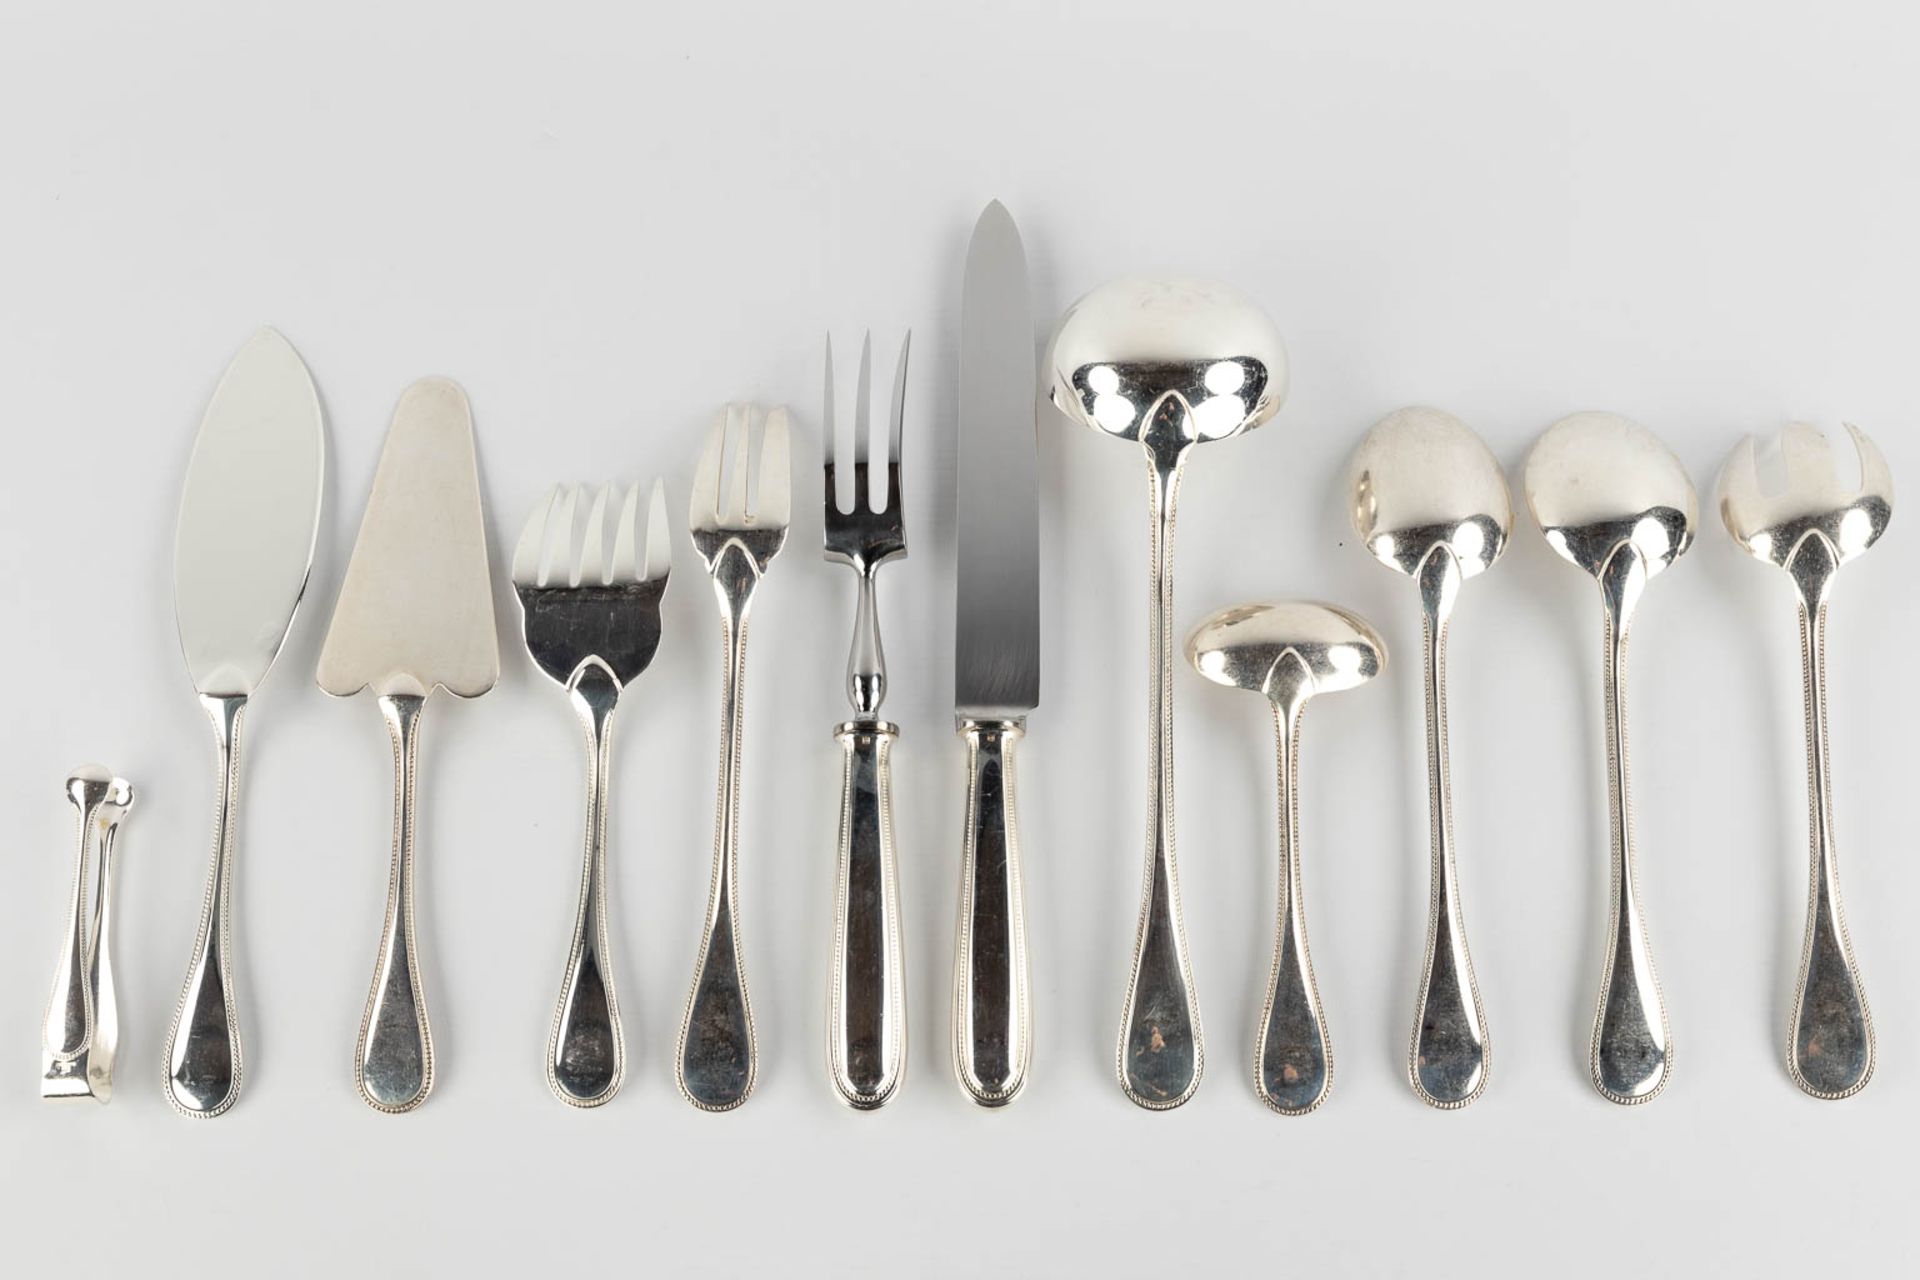 Christofle 'Perles' a large silver-plated cutlery in a storage box. 144 pieces. (D:29 x W:46 x H:33 - Image 10 of 21